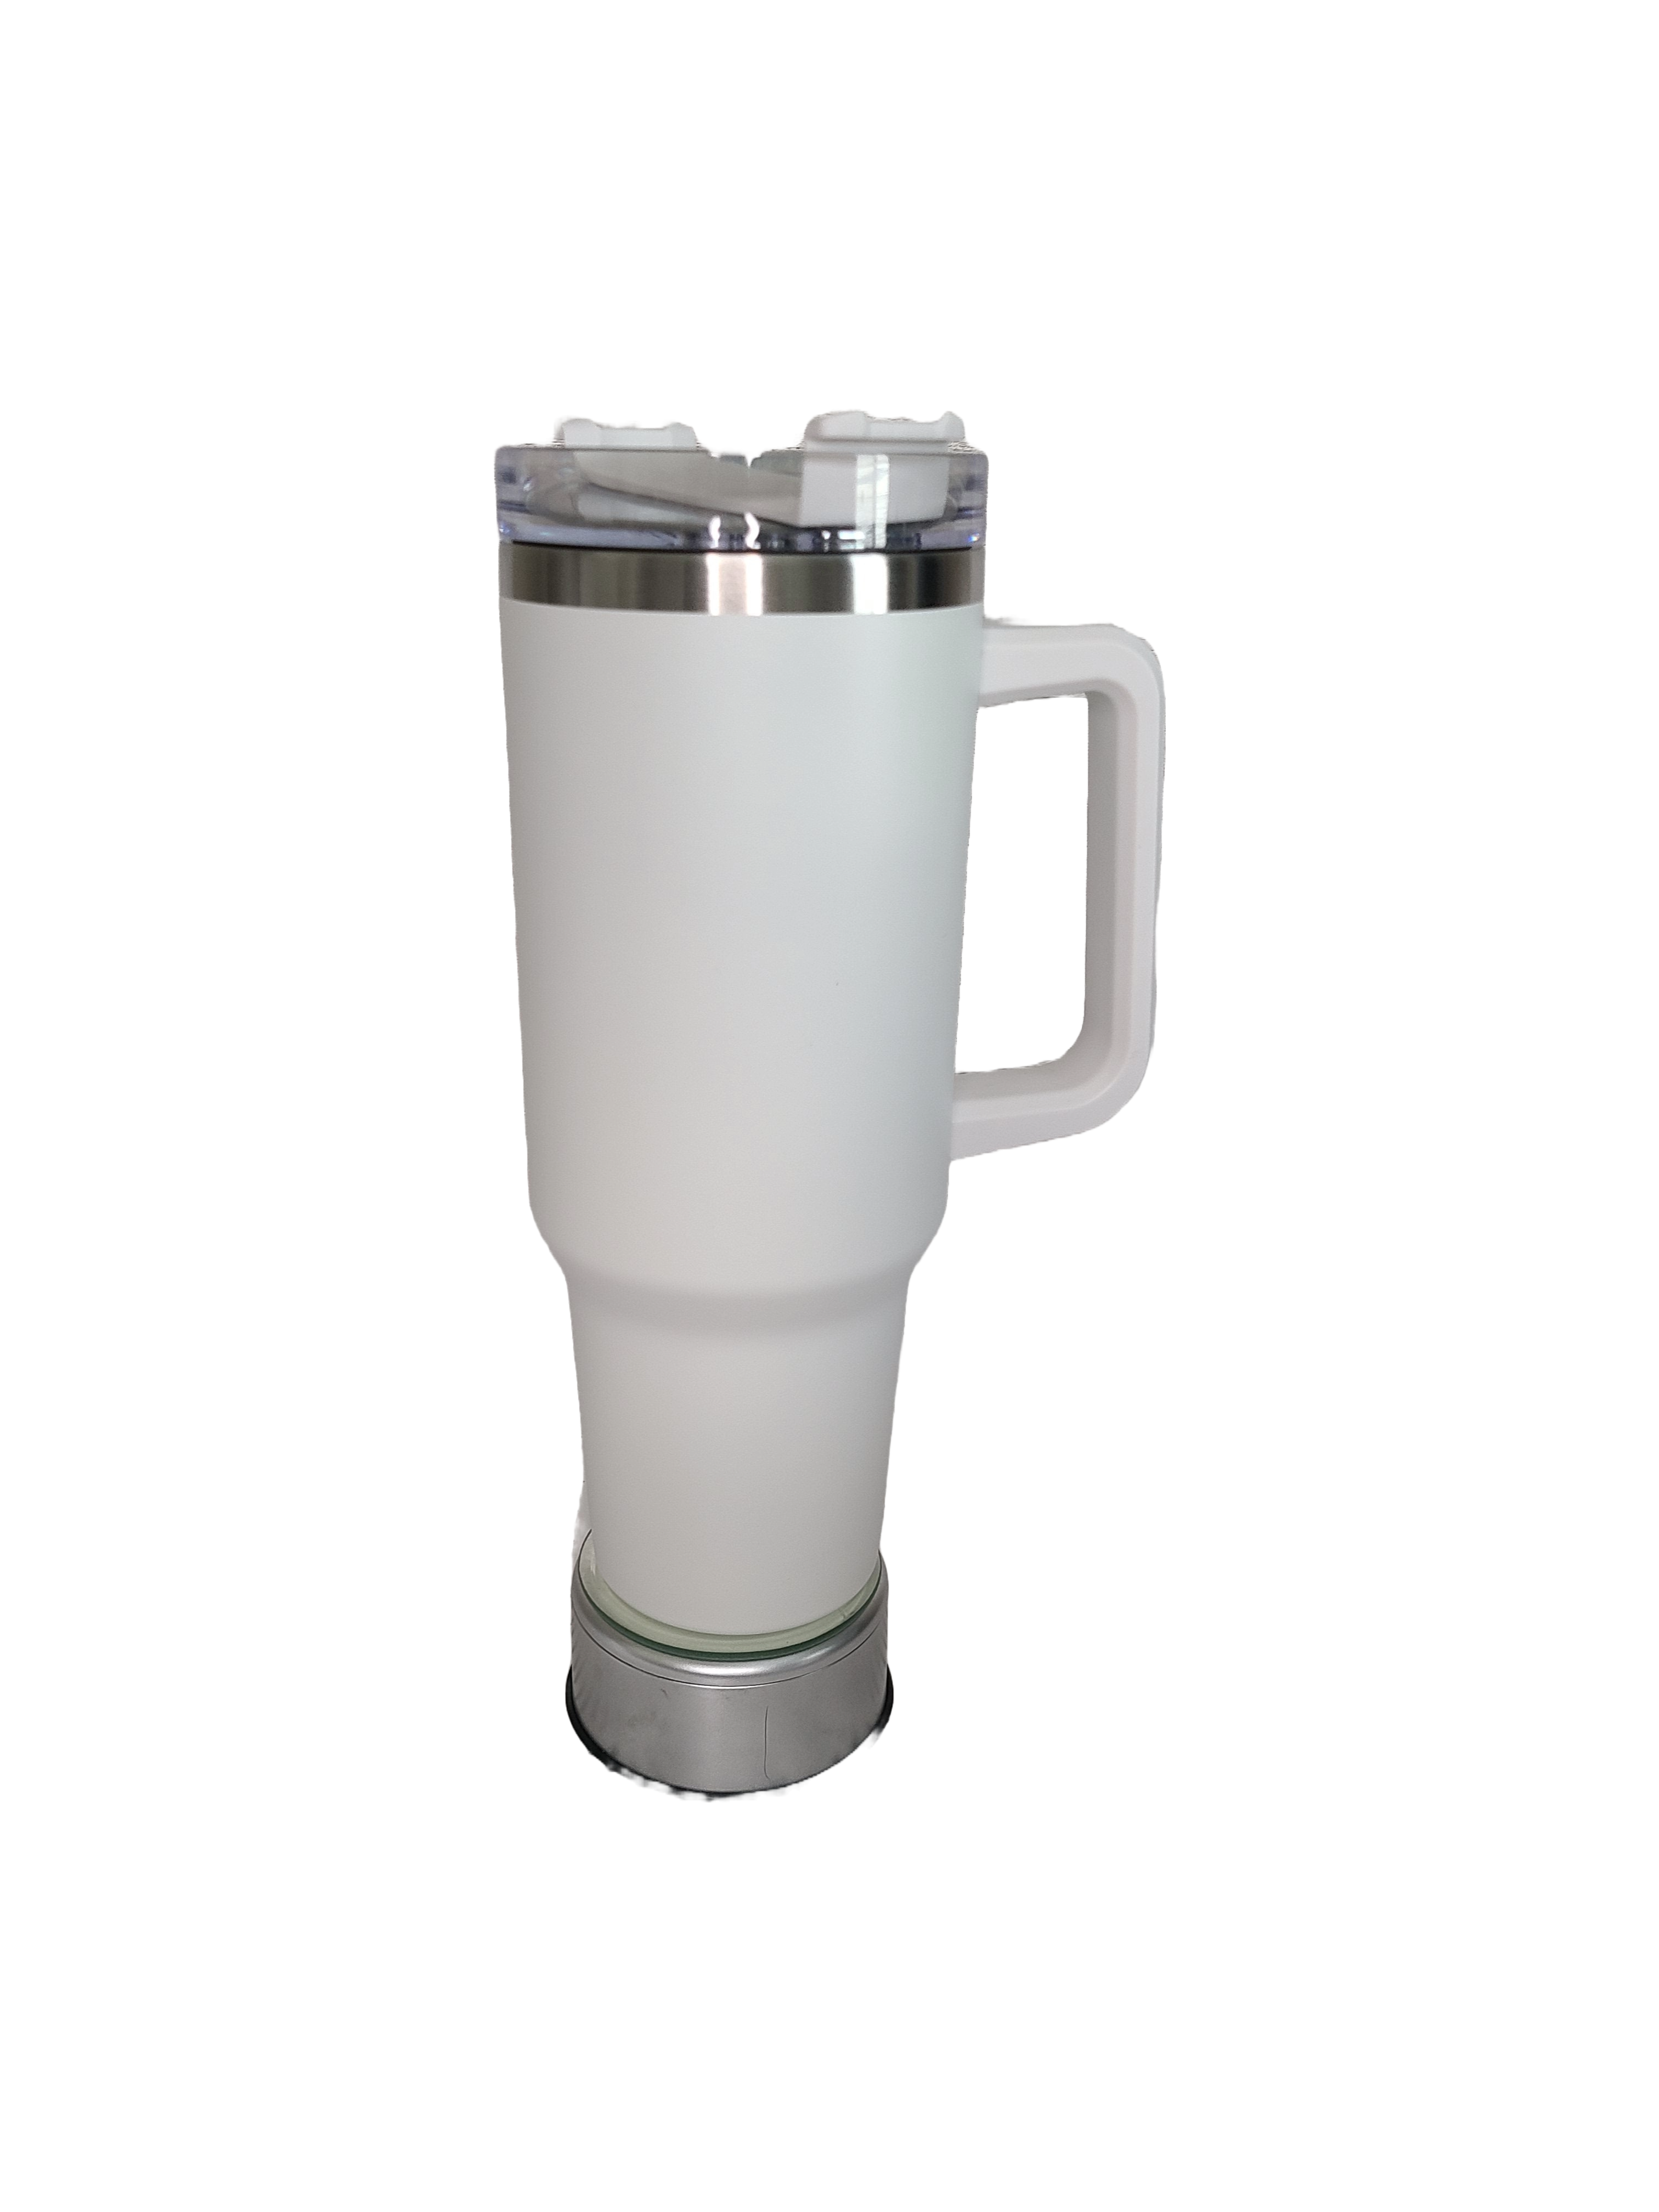 40 oz Stainless Steel Tumbler with Handle-"Cactus Designs"